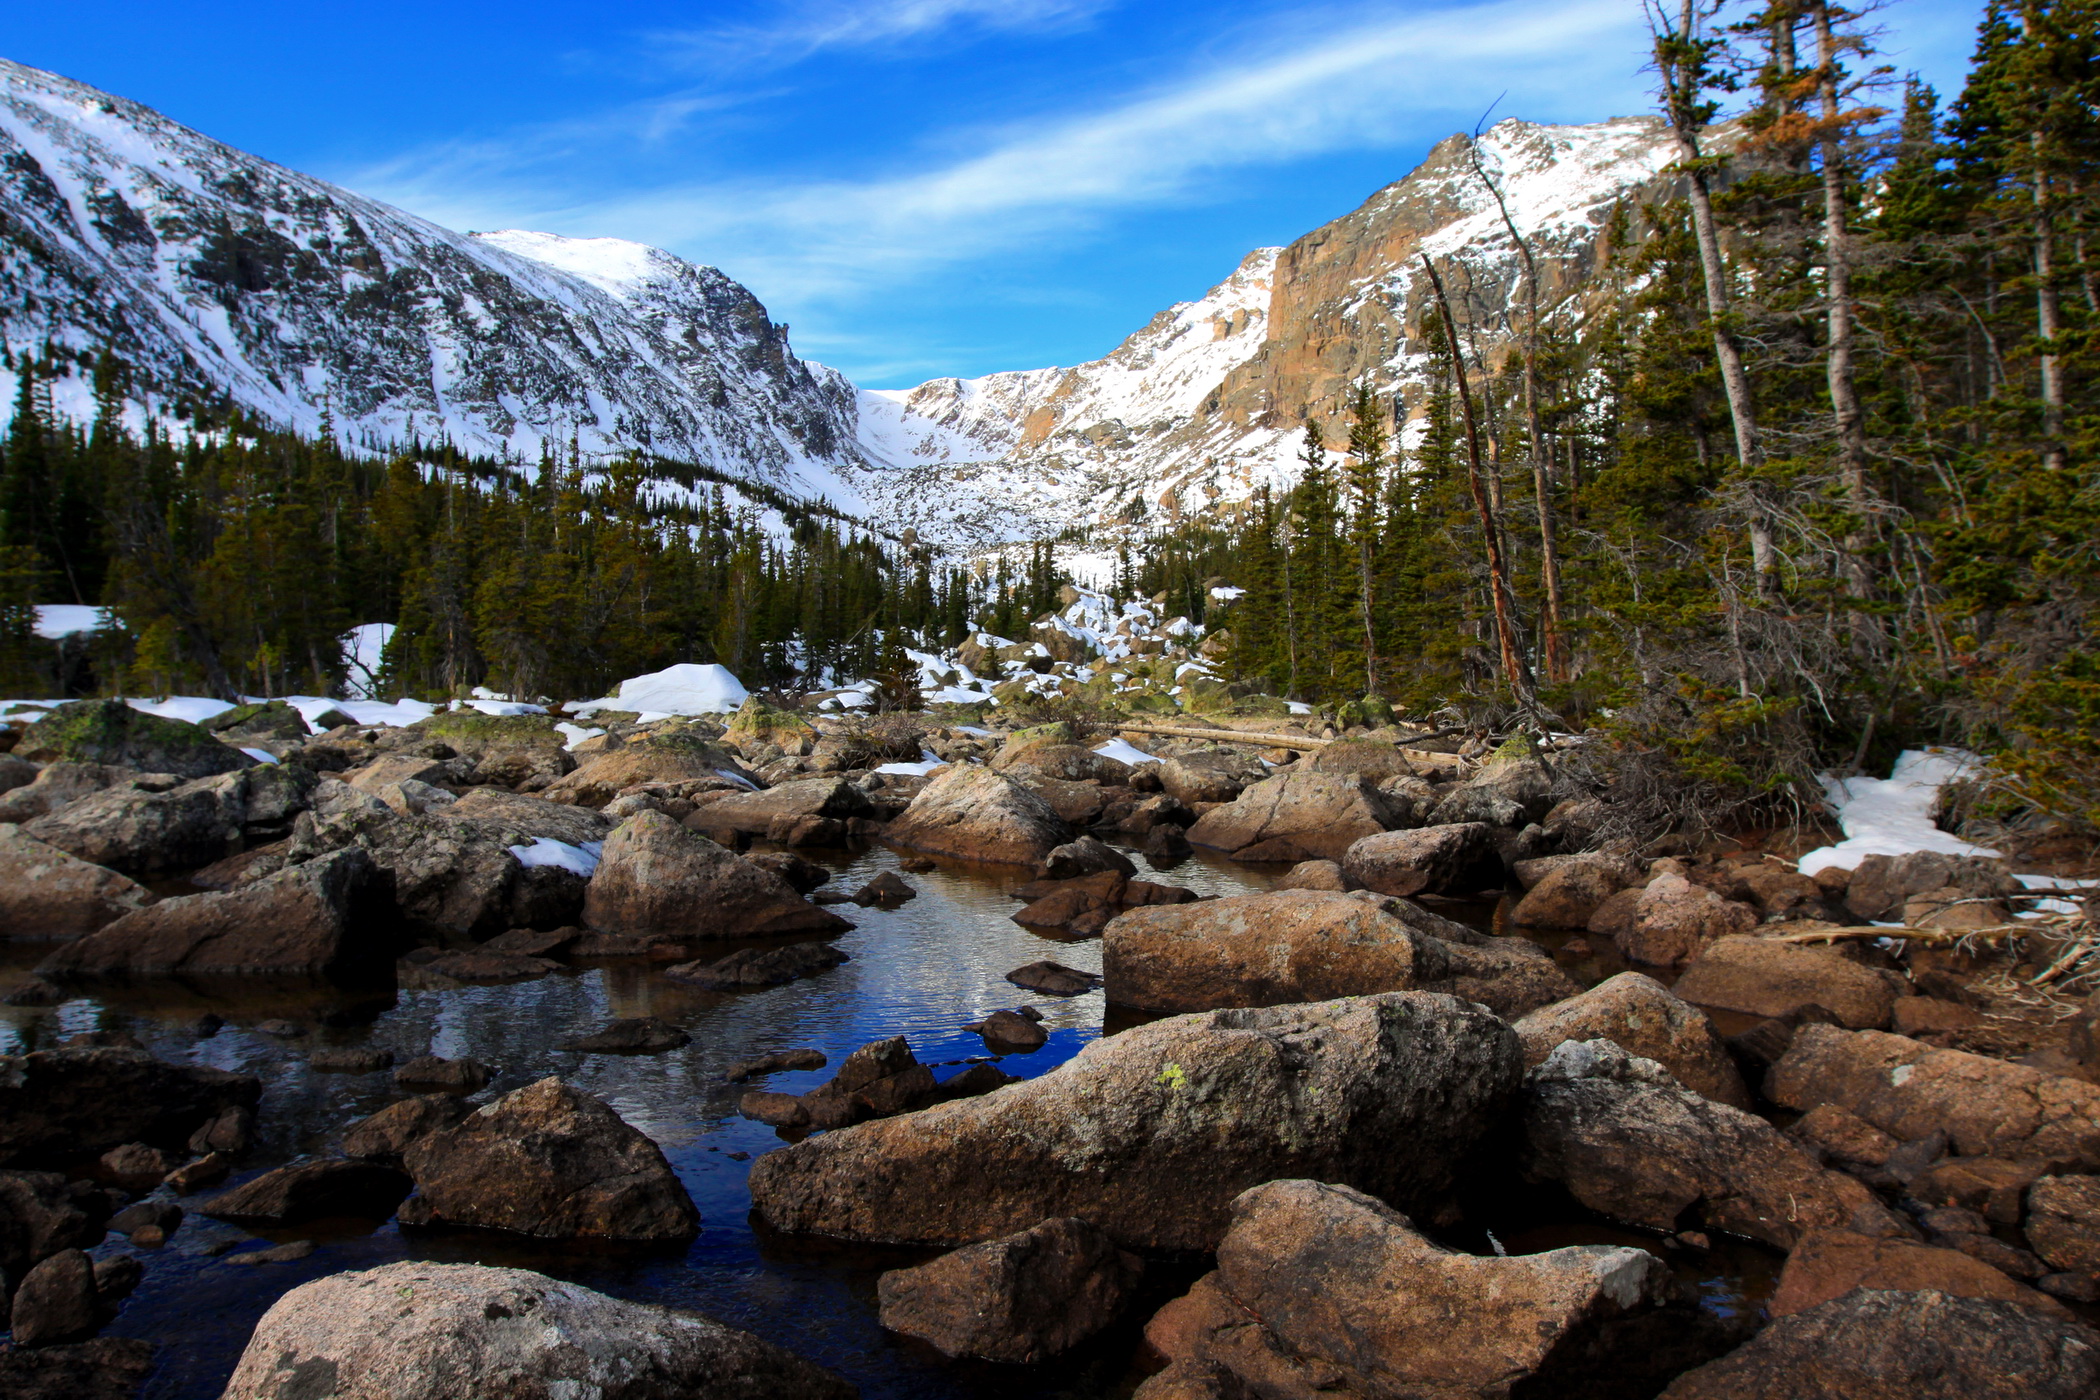  1279kB Outstanding Rocky Mountain wallpaper Landscapes wallpapers